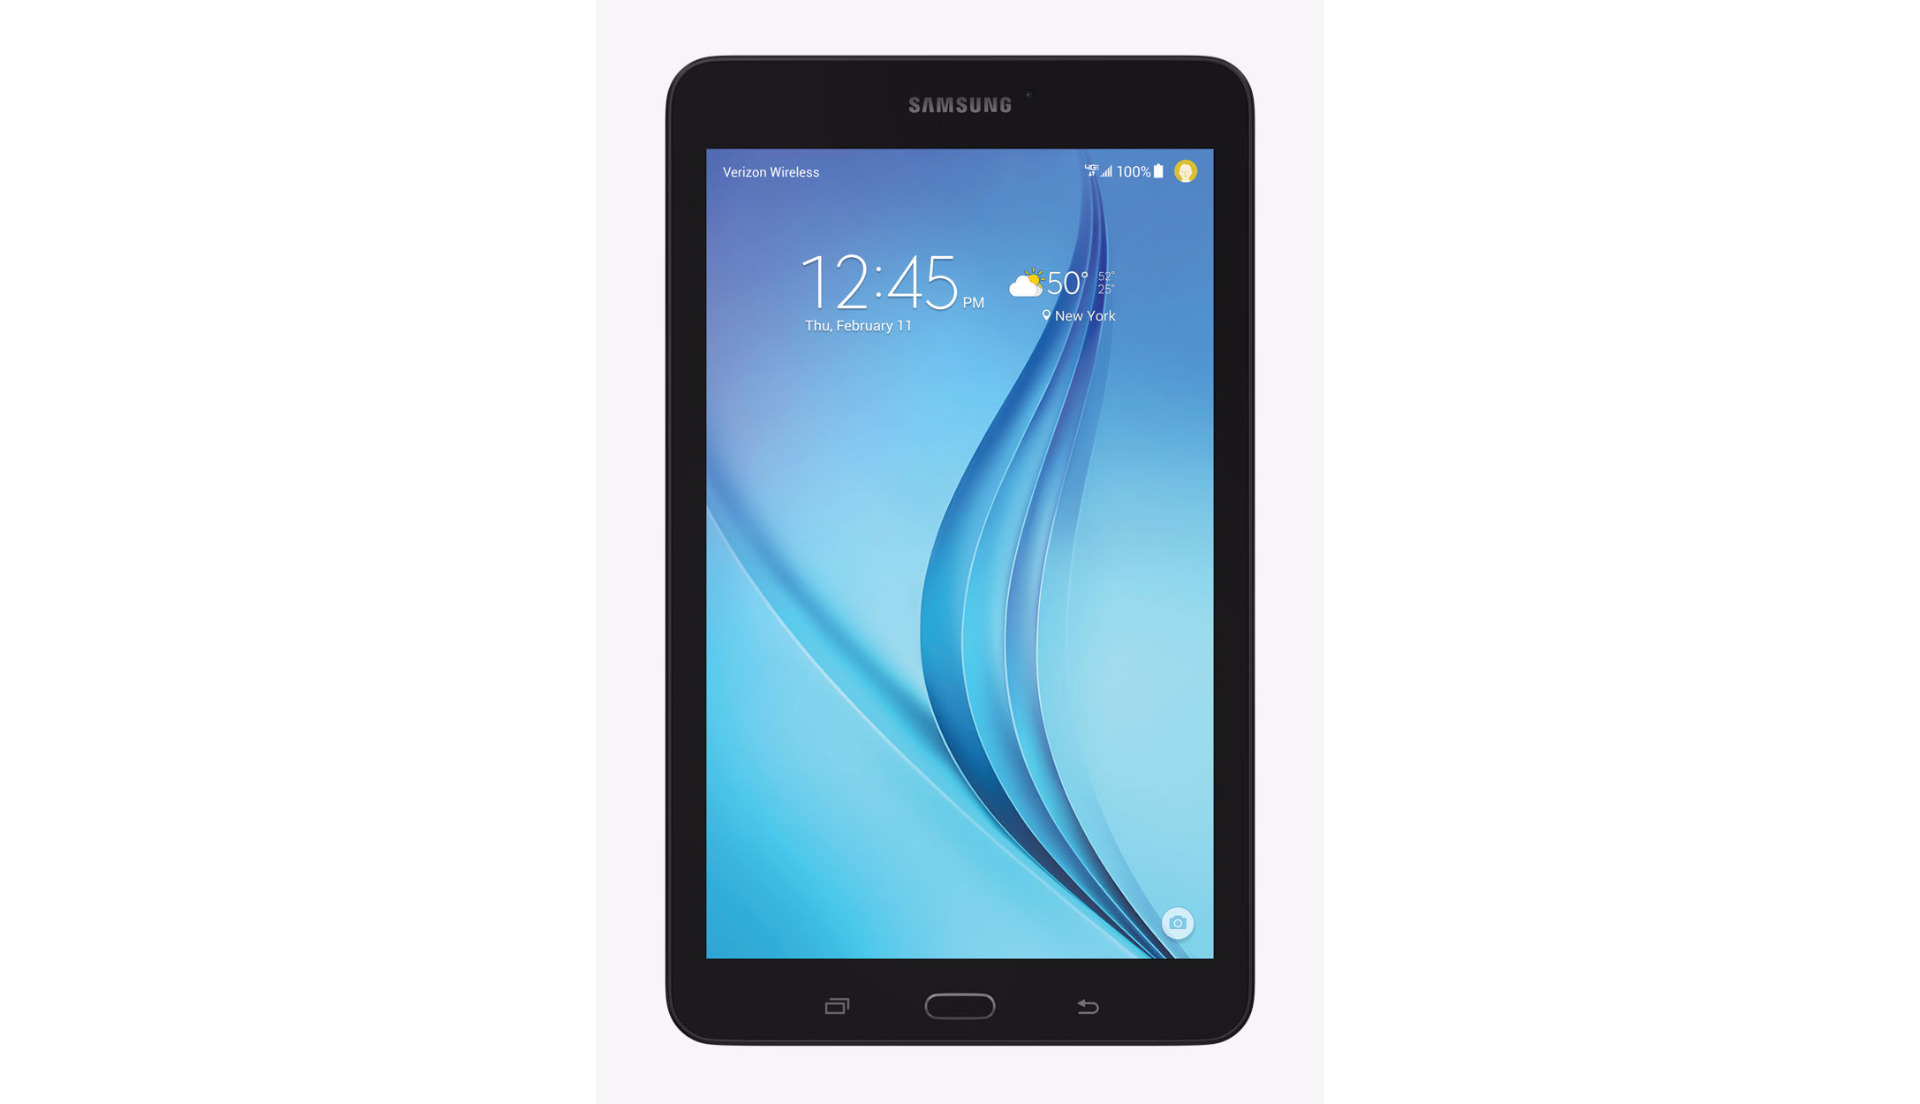 the-samsung-galaxy-tab-e-from-verizon-is-just-10-41-per-month